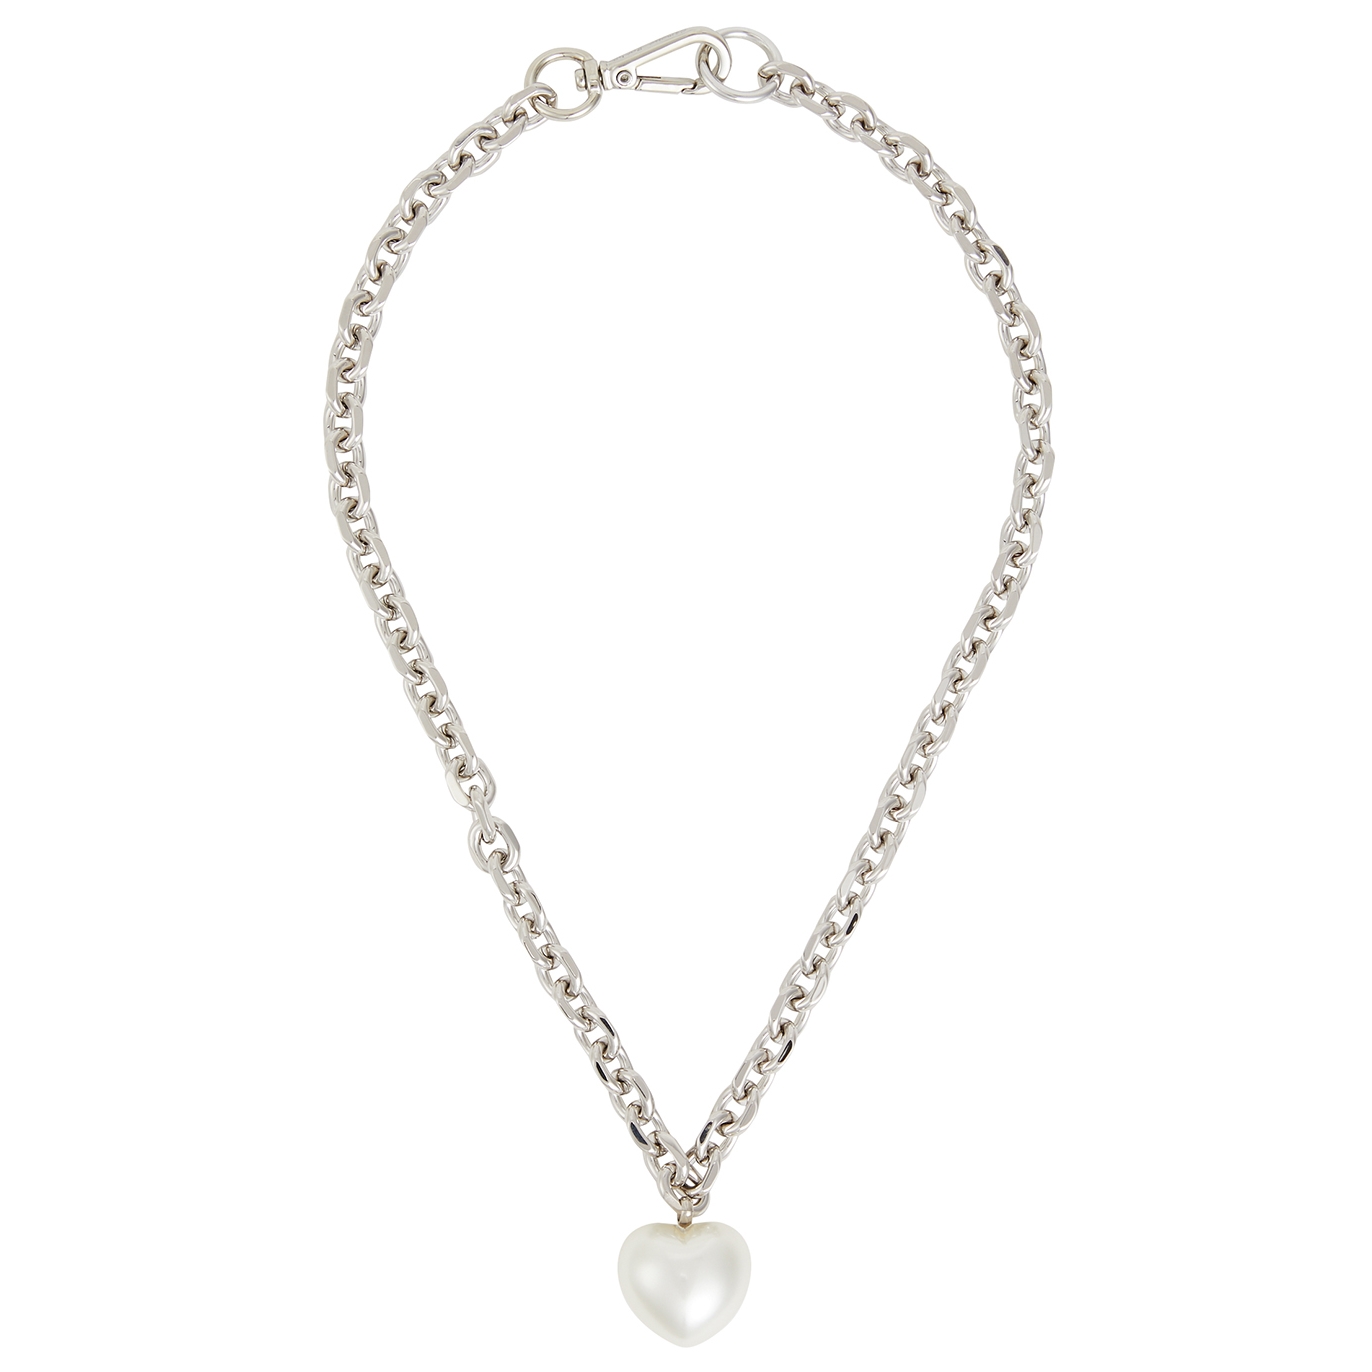 Simone Rocha Heart Faux-pearl Embellished Chain Necklace - One Size